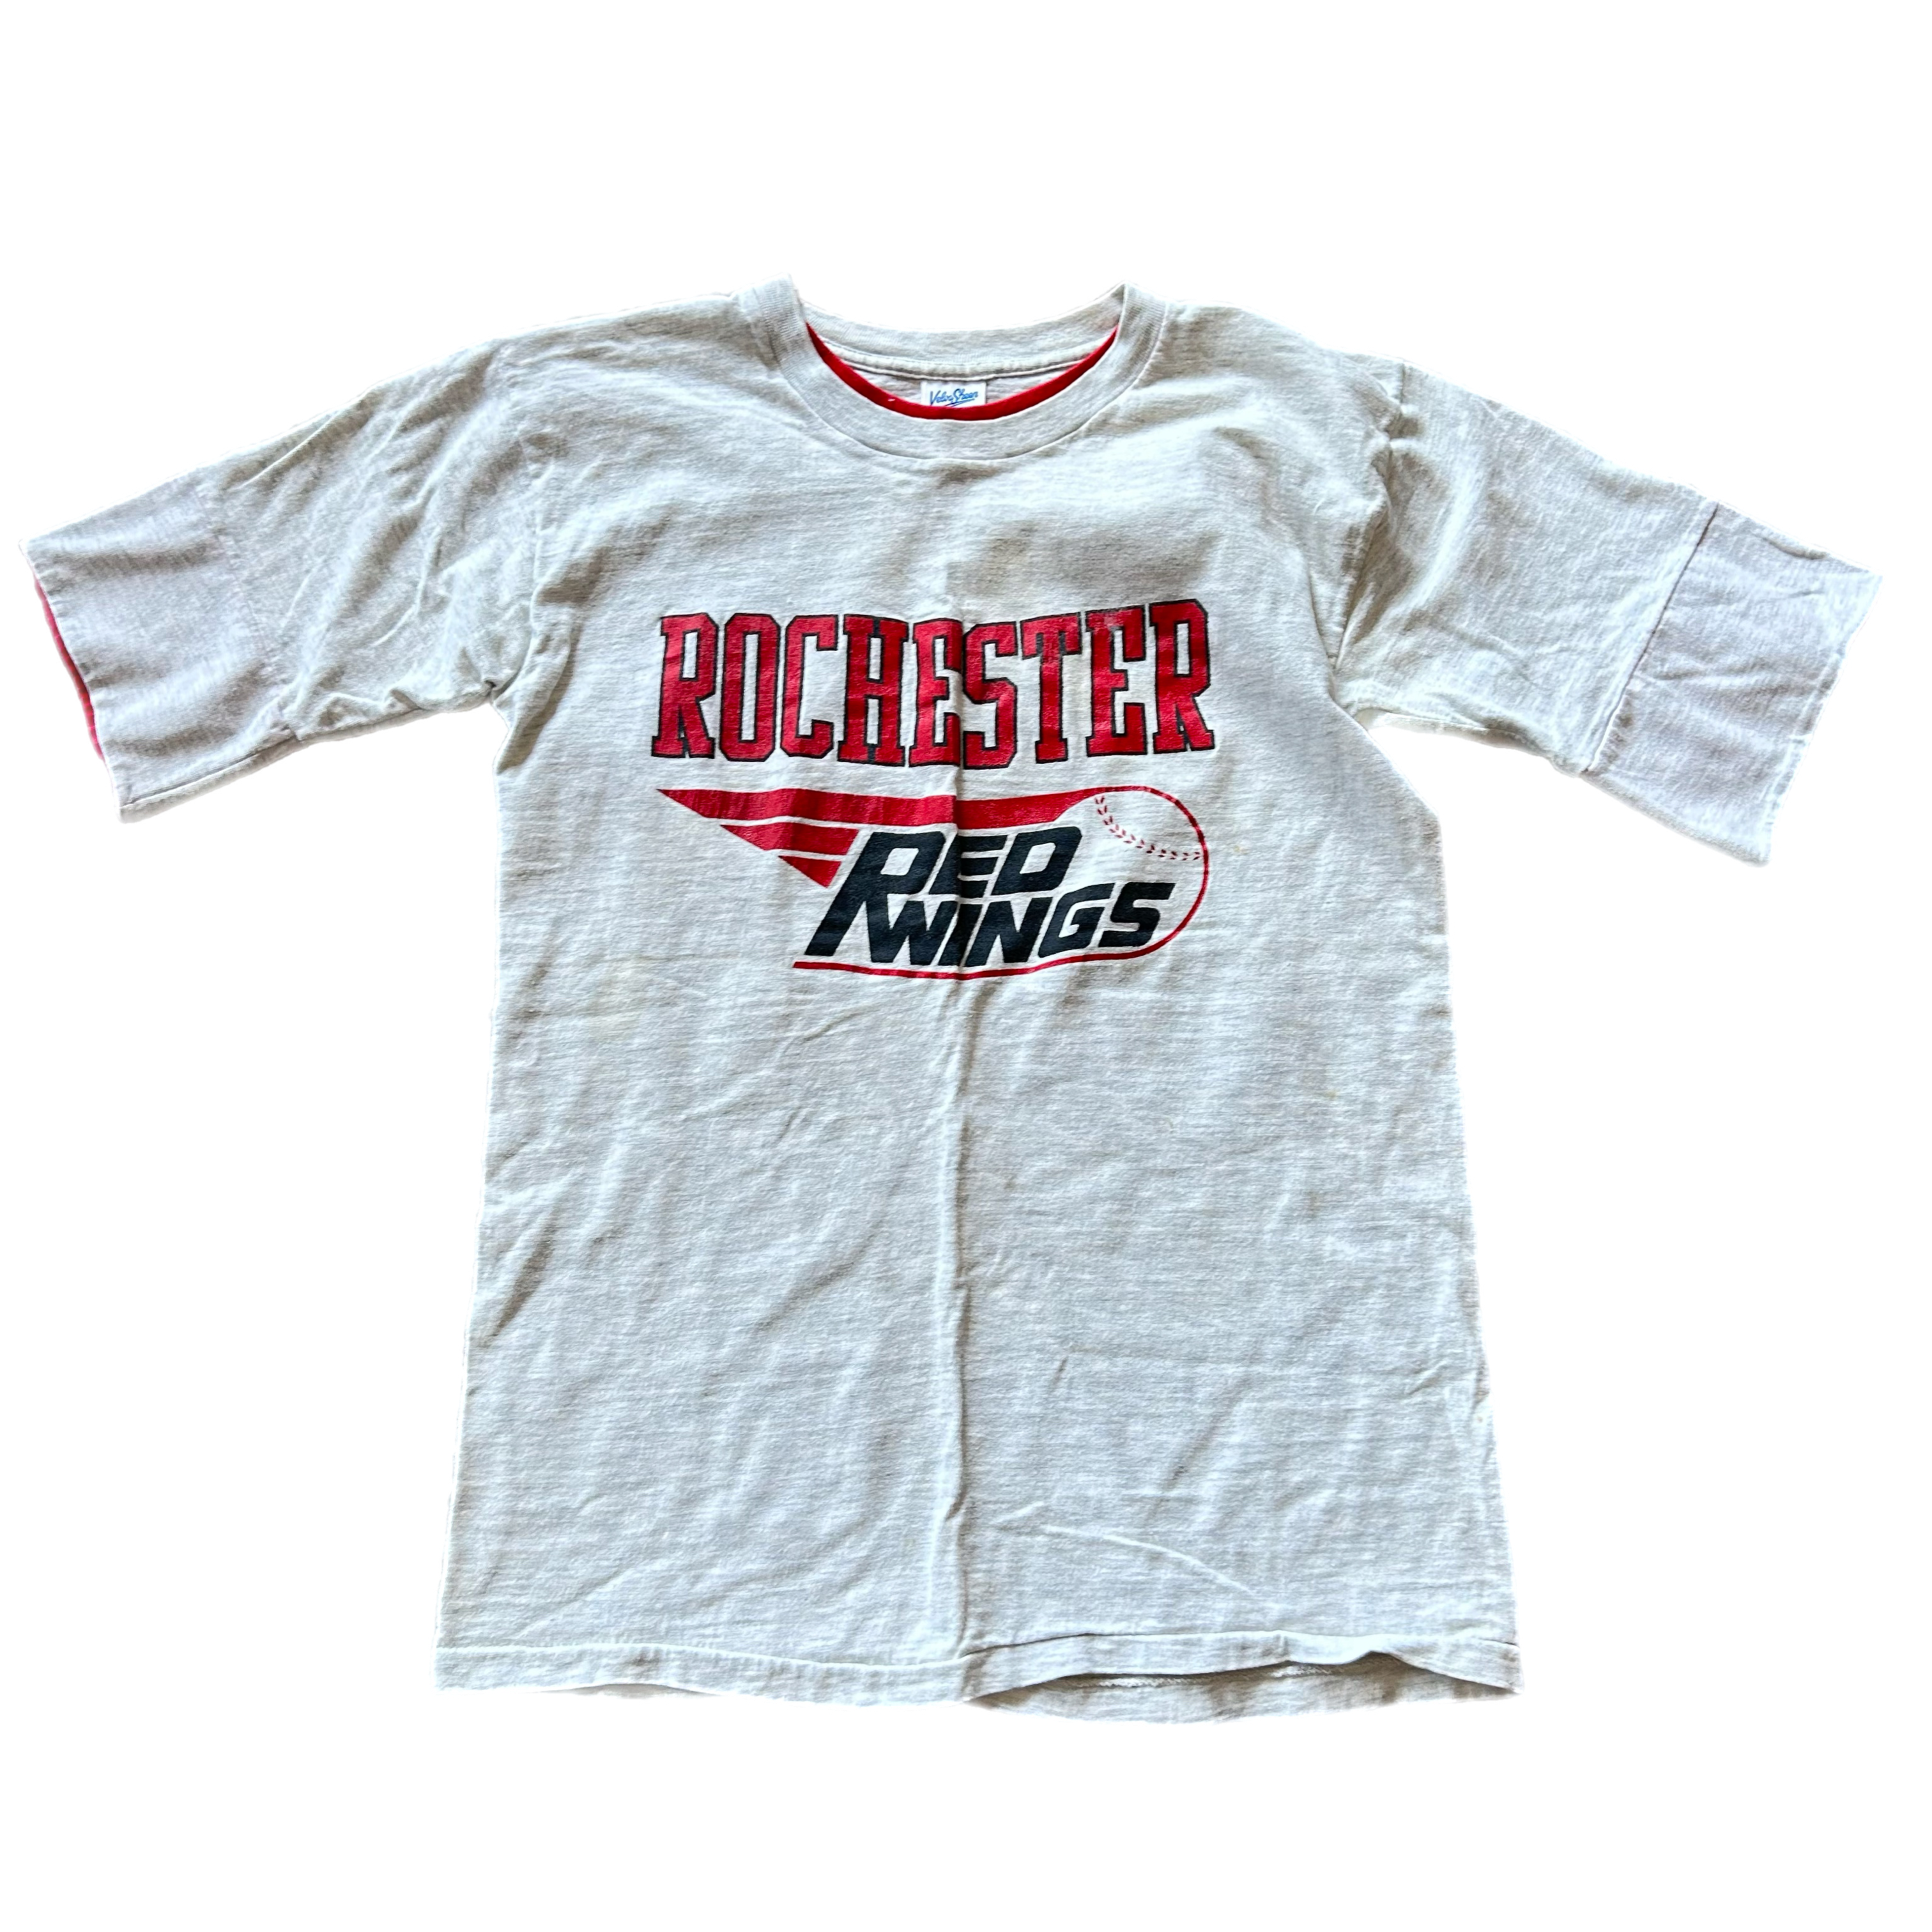 Vintage 1980s Rochester Red Wings Baseball Tee